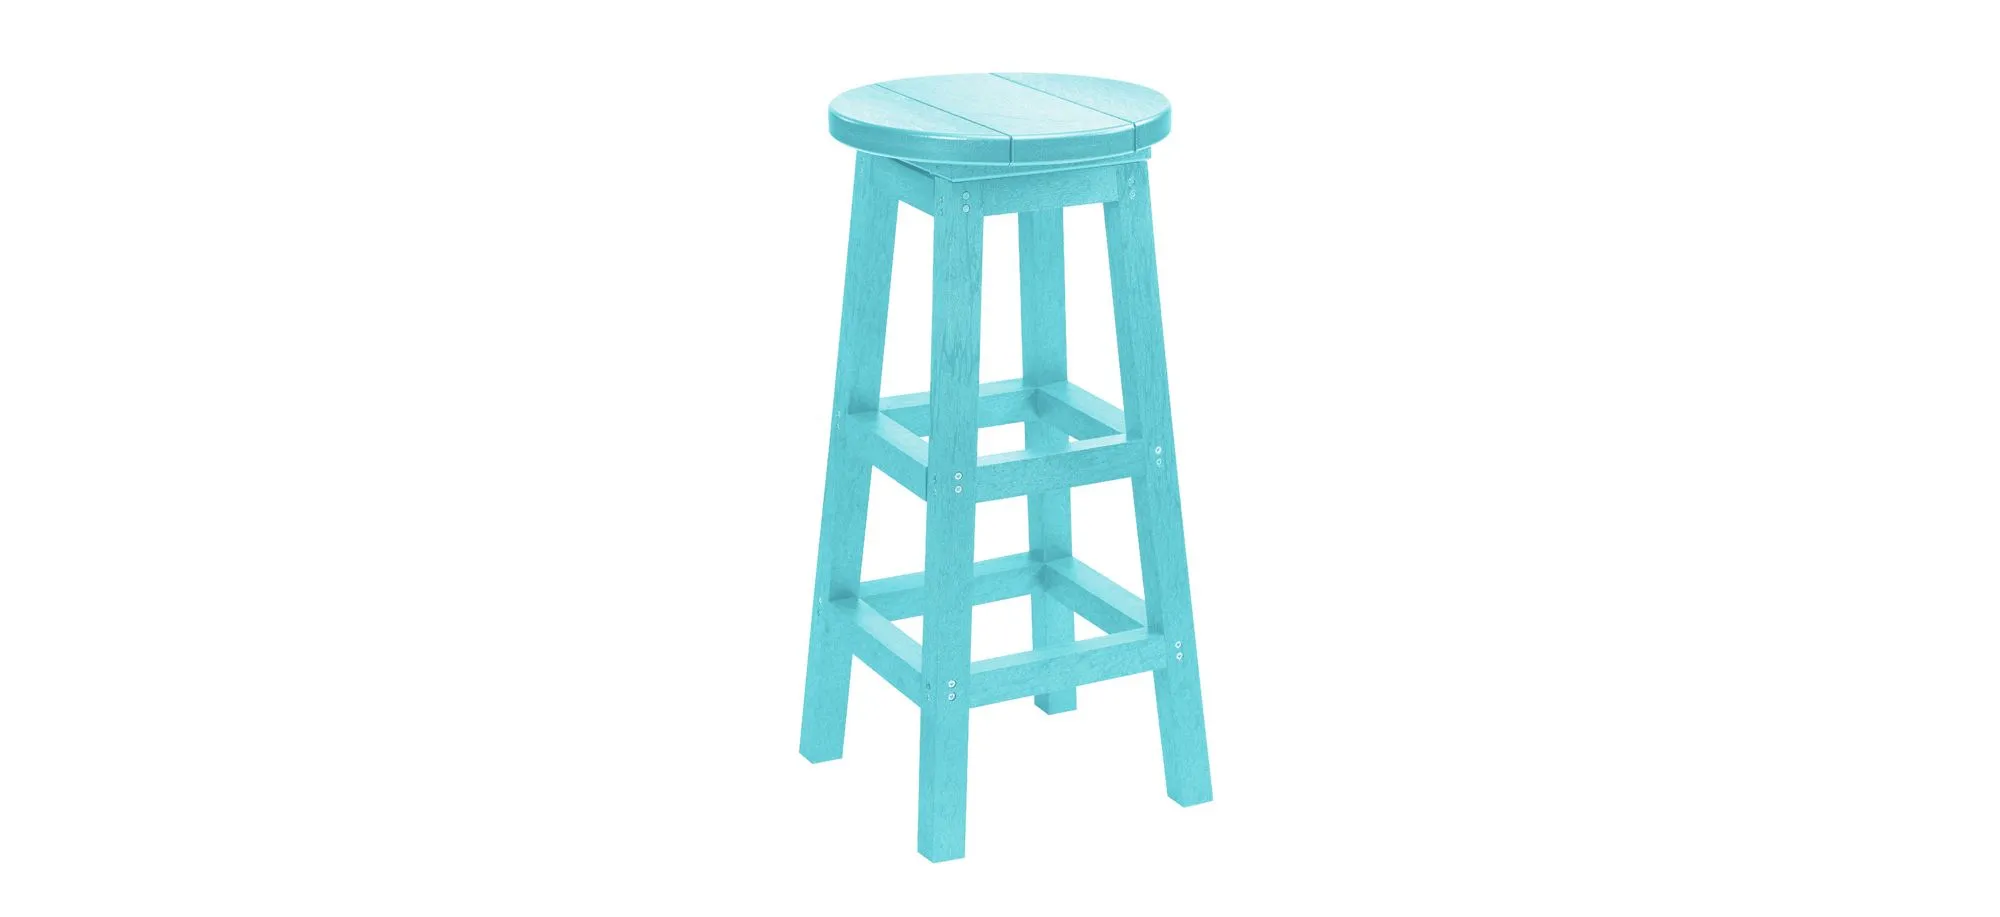 Generation Recycled Outdoor Barstool in Gray by C.R. Plastic Products